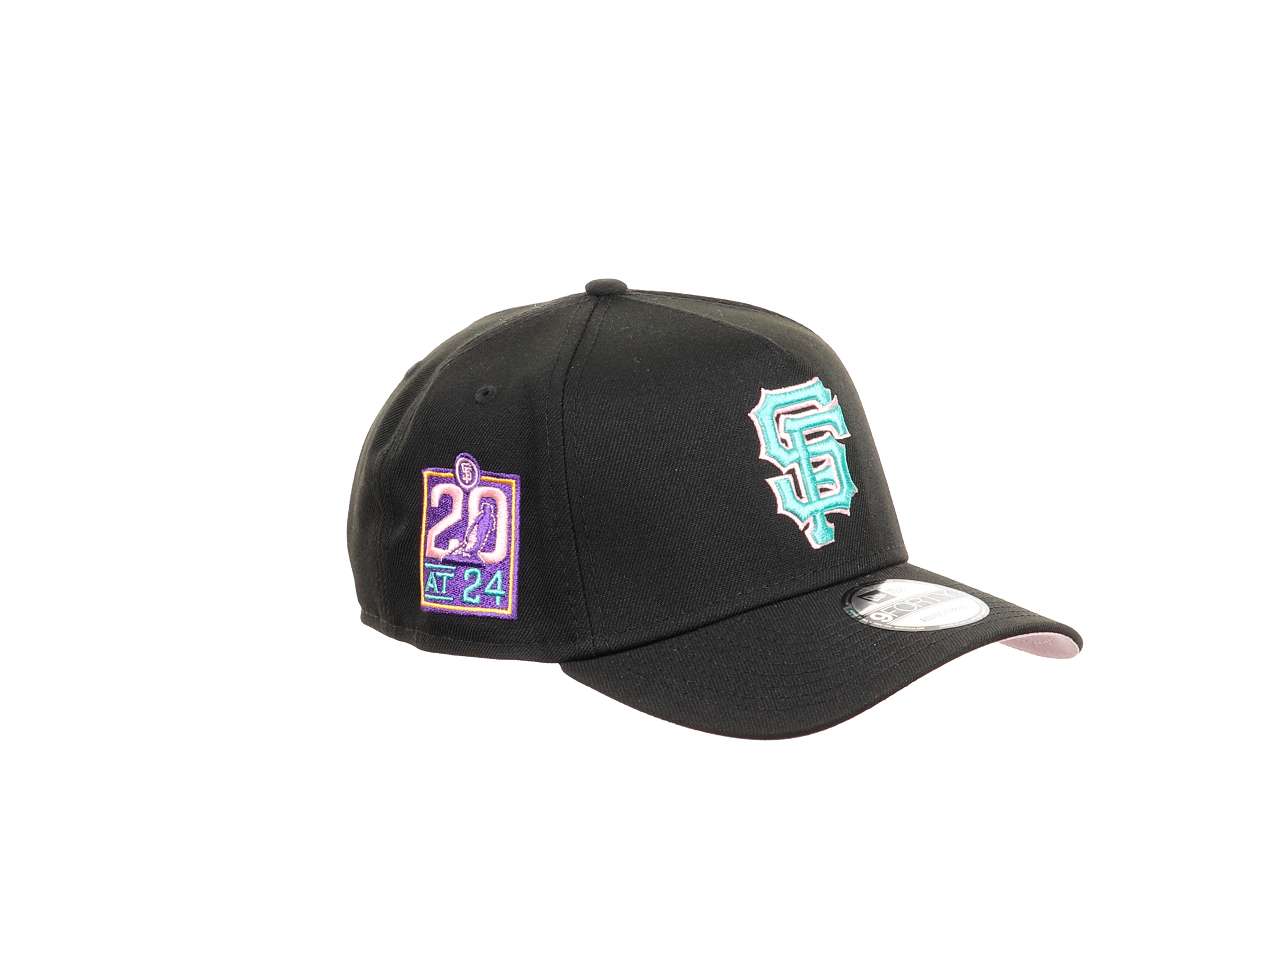 San Francisco Giants MLB 20th anniversary at Oracle Park Sidepatch Black 9Forty A-Frame Snapback Cap New Era